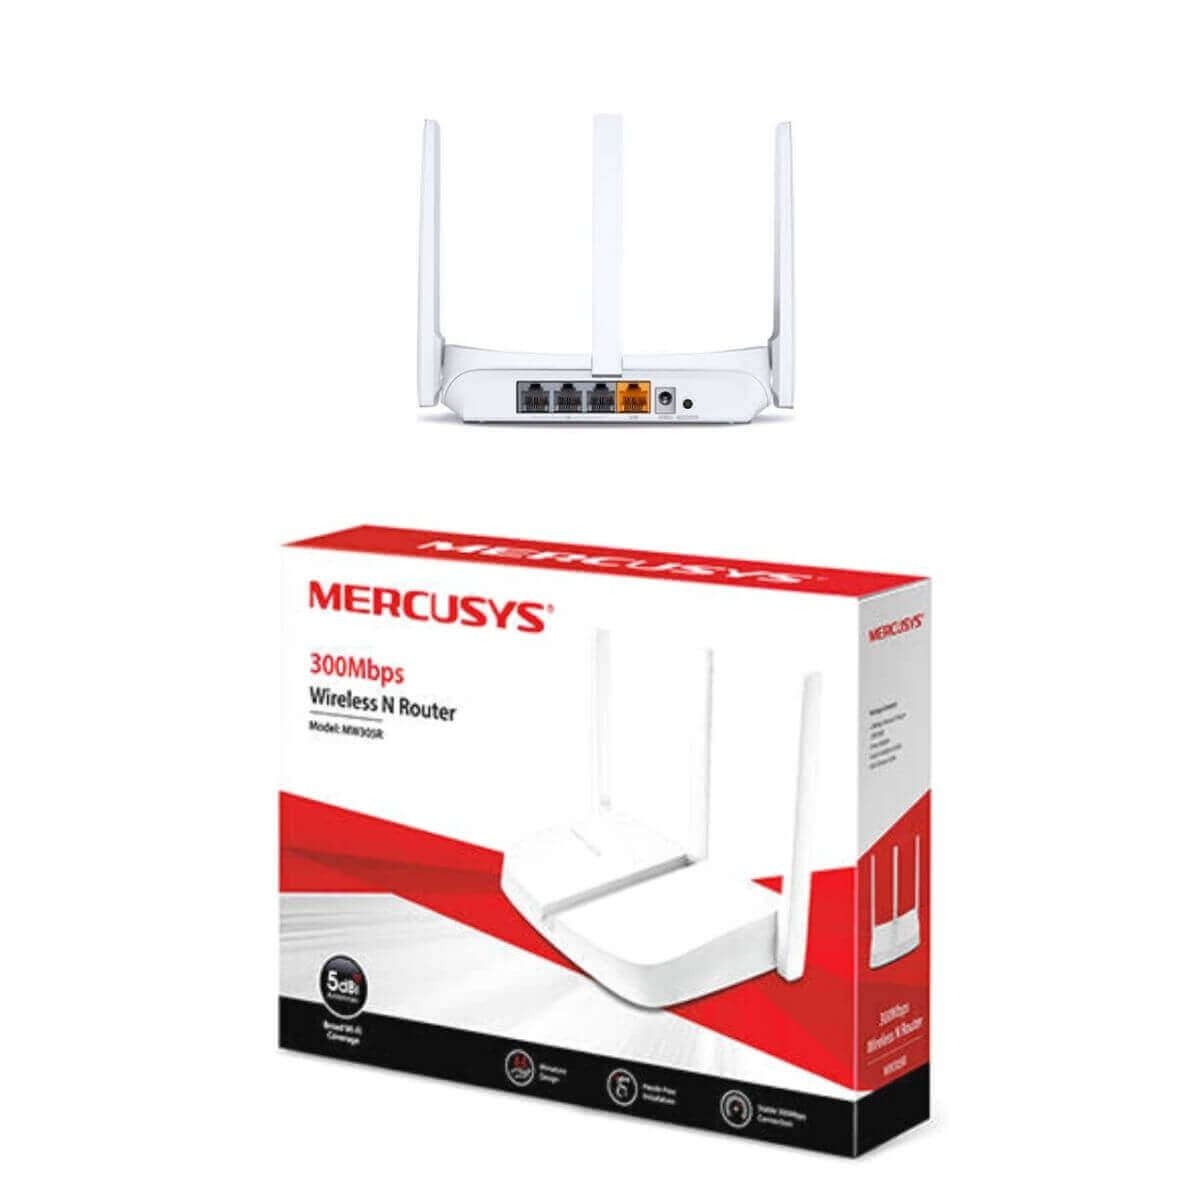 Mercusys 305R 300Mbps Multi-Mode Wireless N Router BD